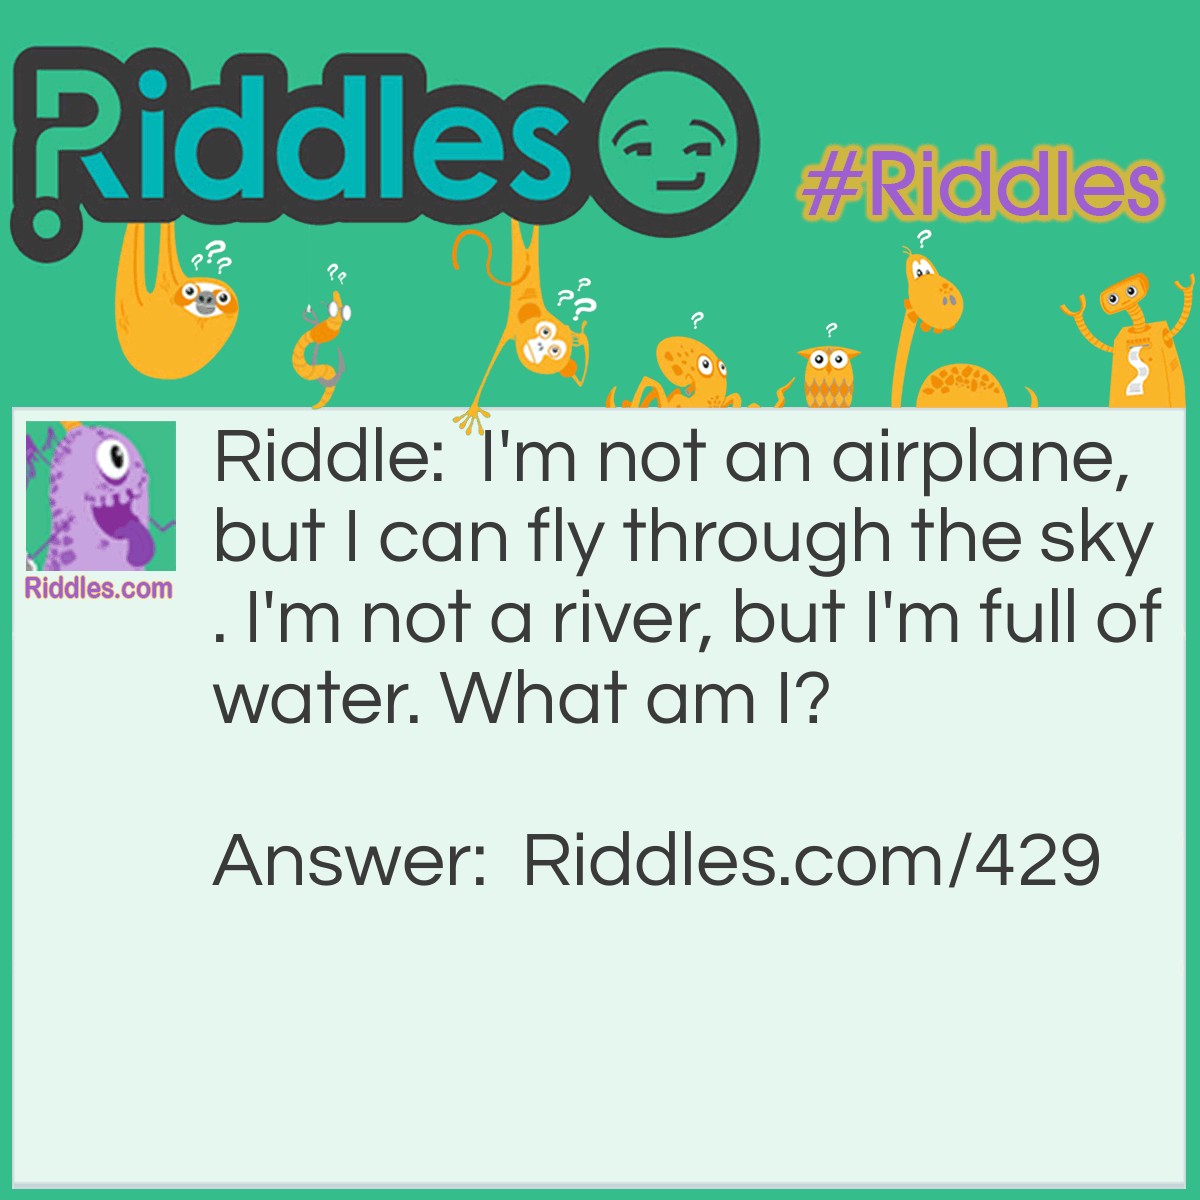 Riddle: I'm not an airplane, but I can fly through the sky. I'm not a river, but I'm full of water. What am I? Answer: A cloud.